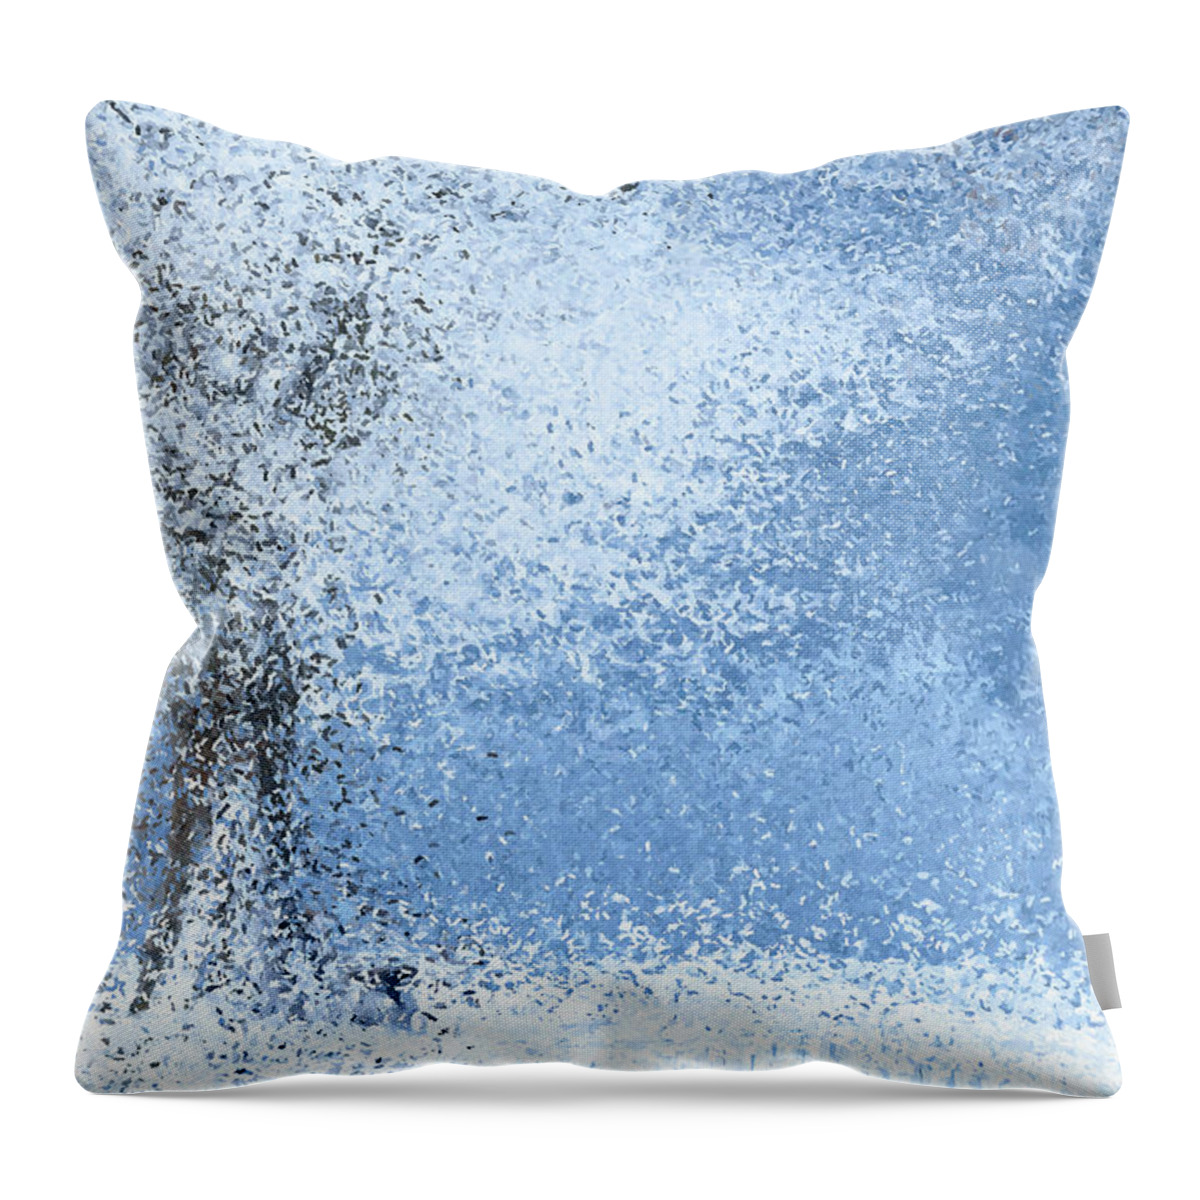 Winter Throw Pillow featuring the mixed media Abstract Winter Scene by Alex Mir